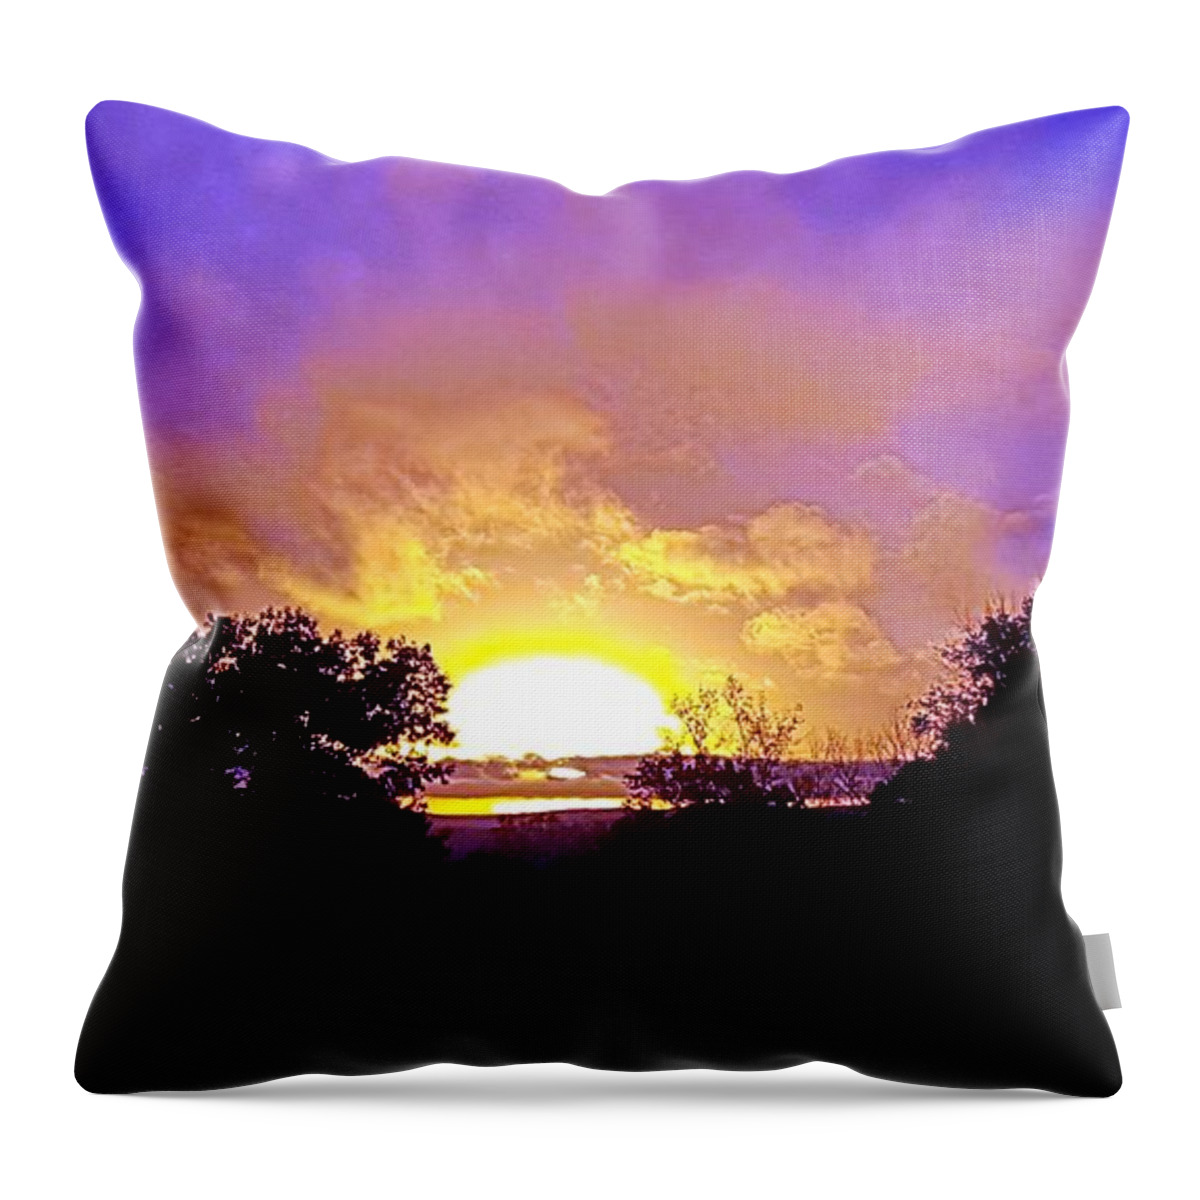 Sunrise Throw Pillow featuring the photograph Incredible Sunrise by Dani McEvoy